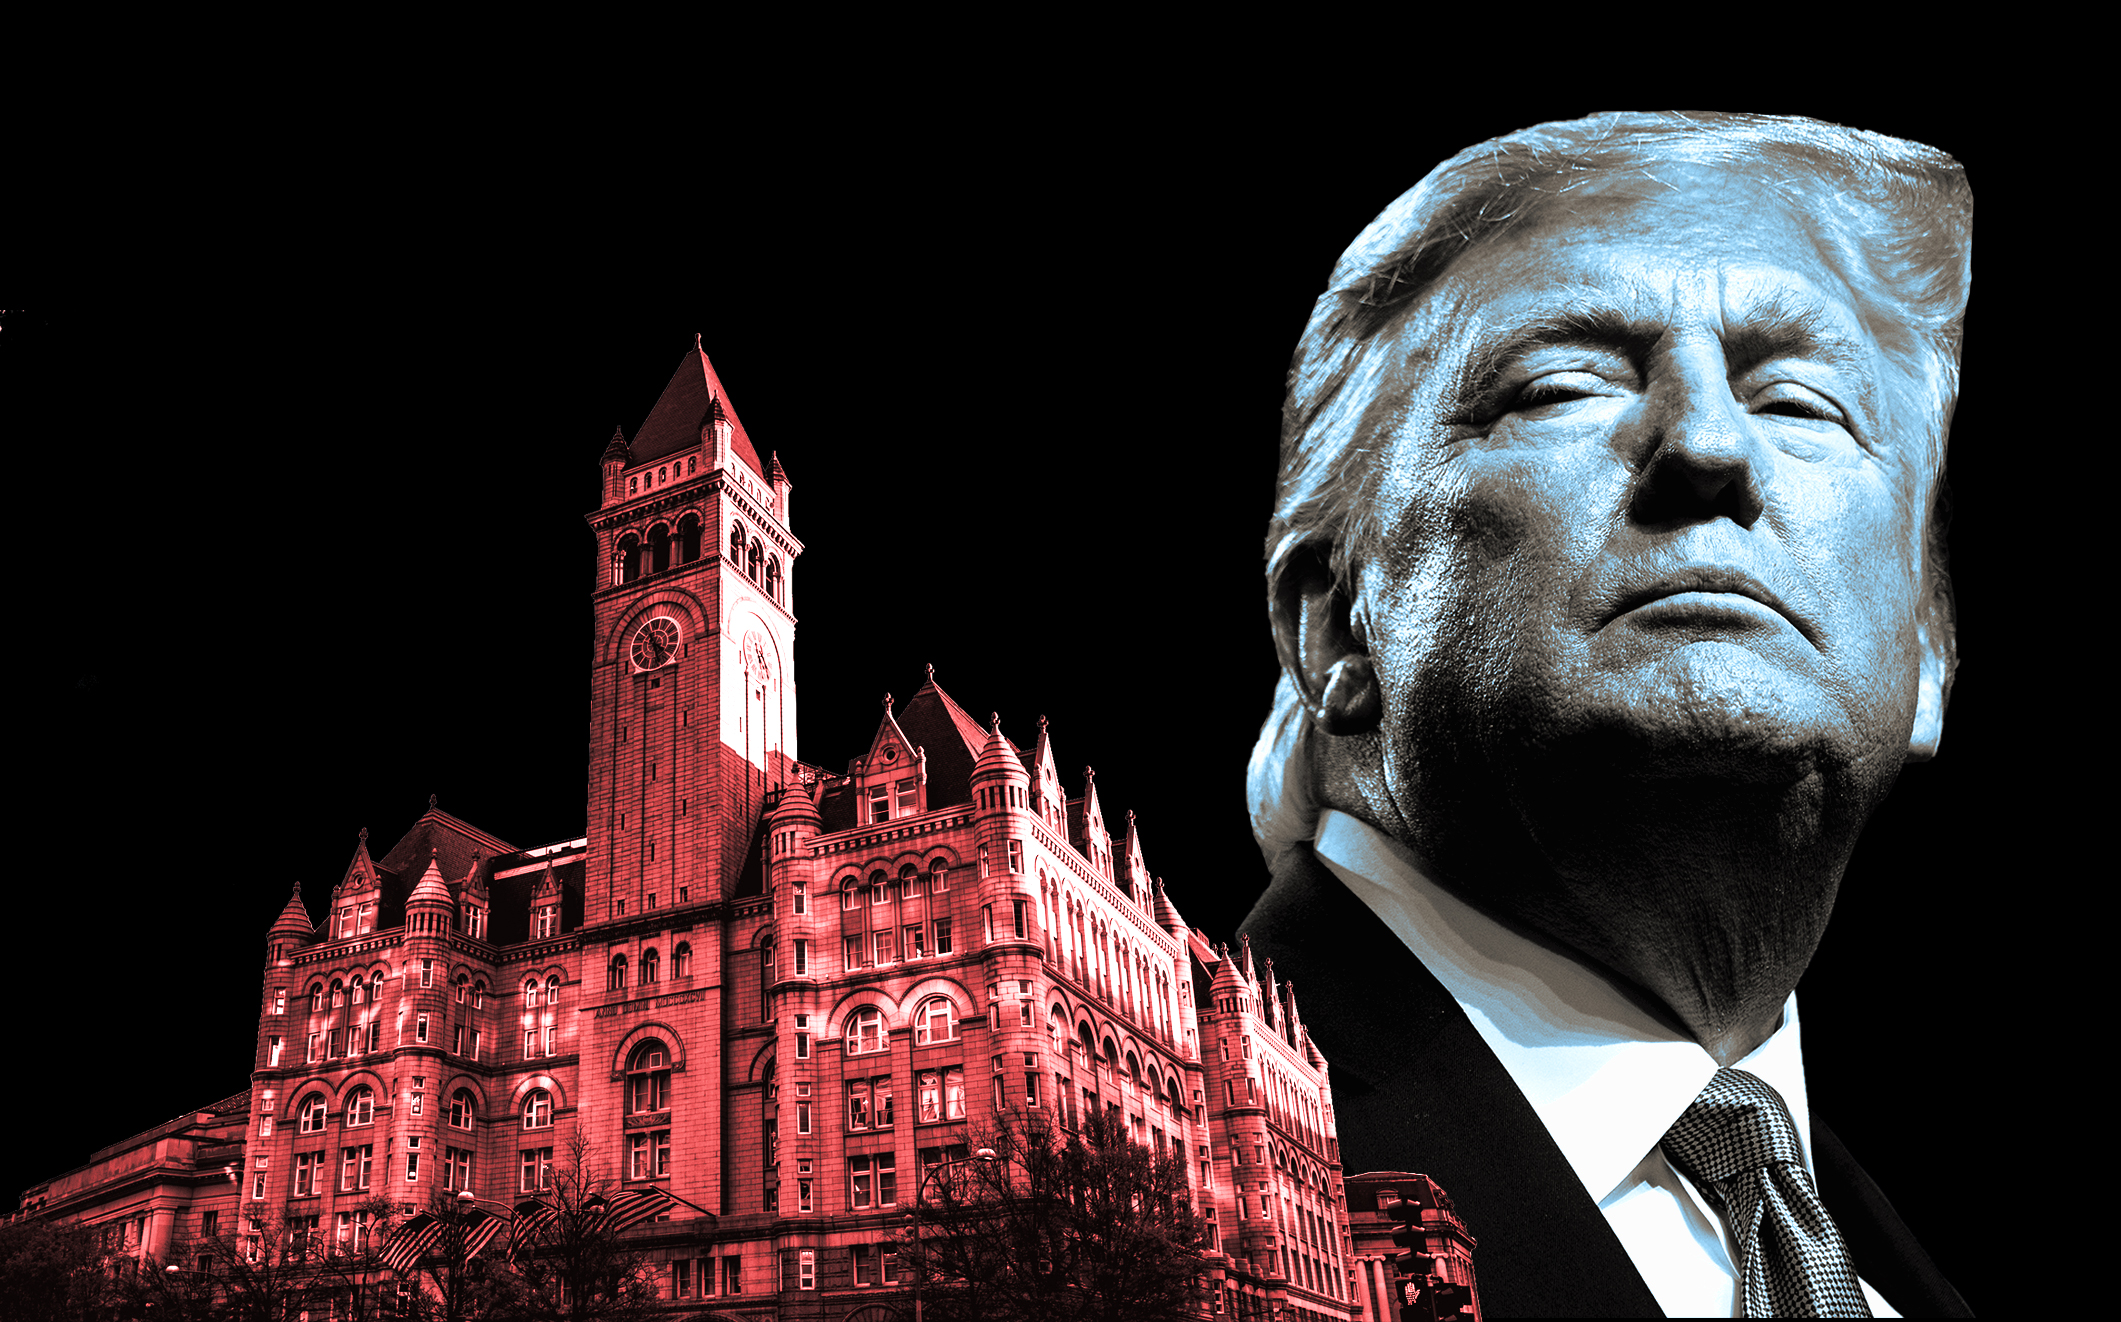 Trump International Hotel in Washington D.C. and President Donald Trump (Credit: Getty Images, iStock)